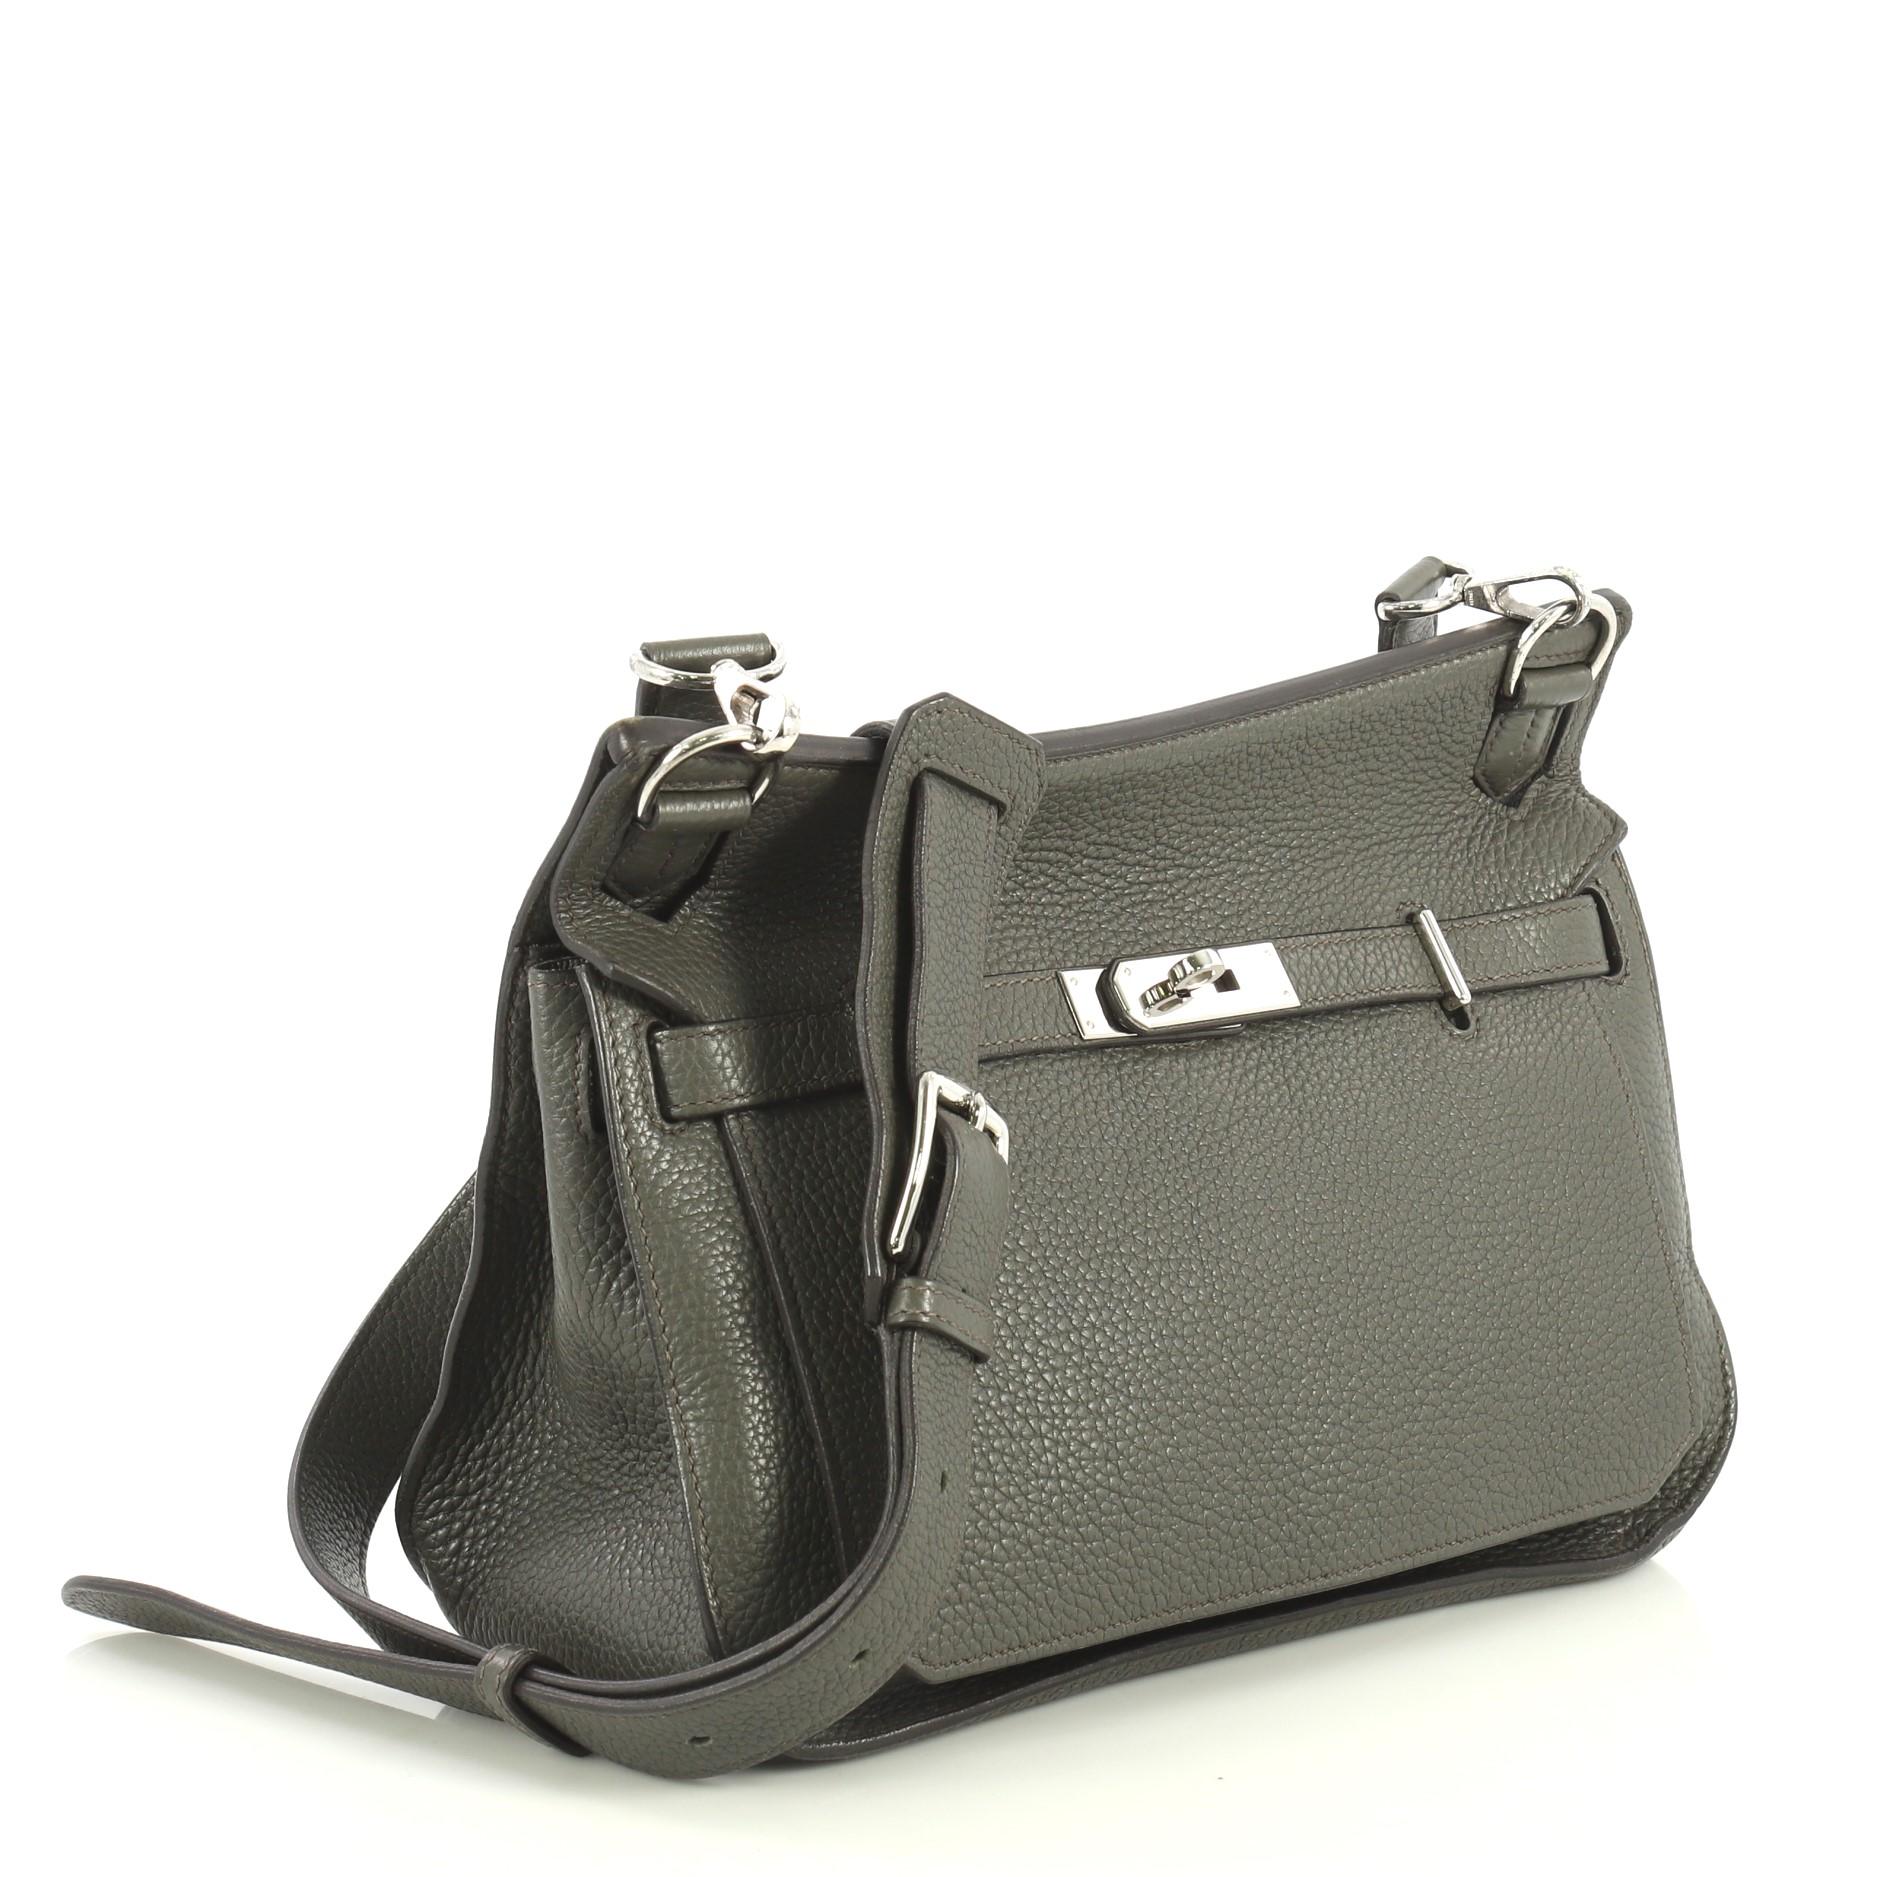 This Hermes Jypsiere Handbag Clemence 28, crafted in Vert de Gris green Clemence leather, features a long adjustable strap and palladium hardware. Its front flap with the turn-lock closure opens to a Vert de Gris green Chevre leather interior with